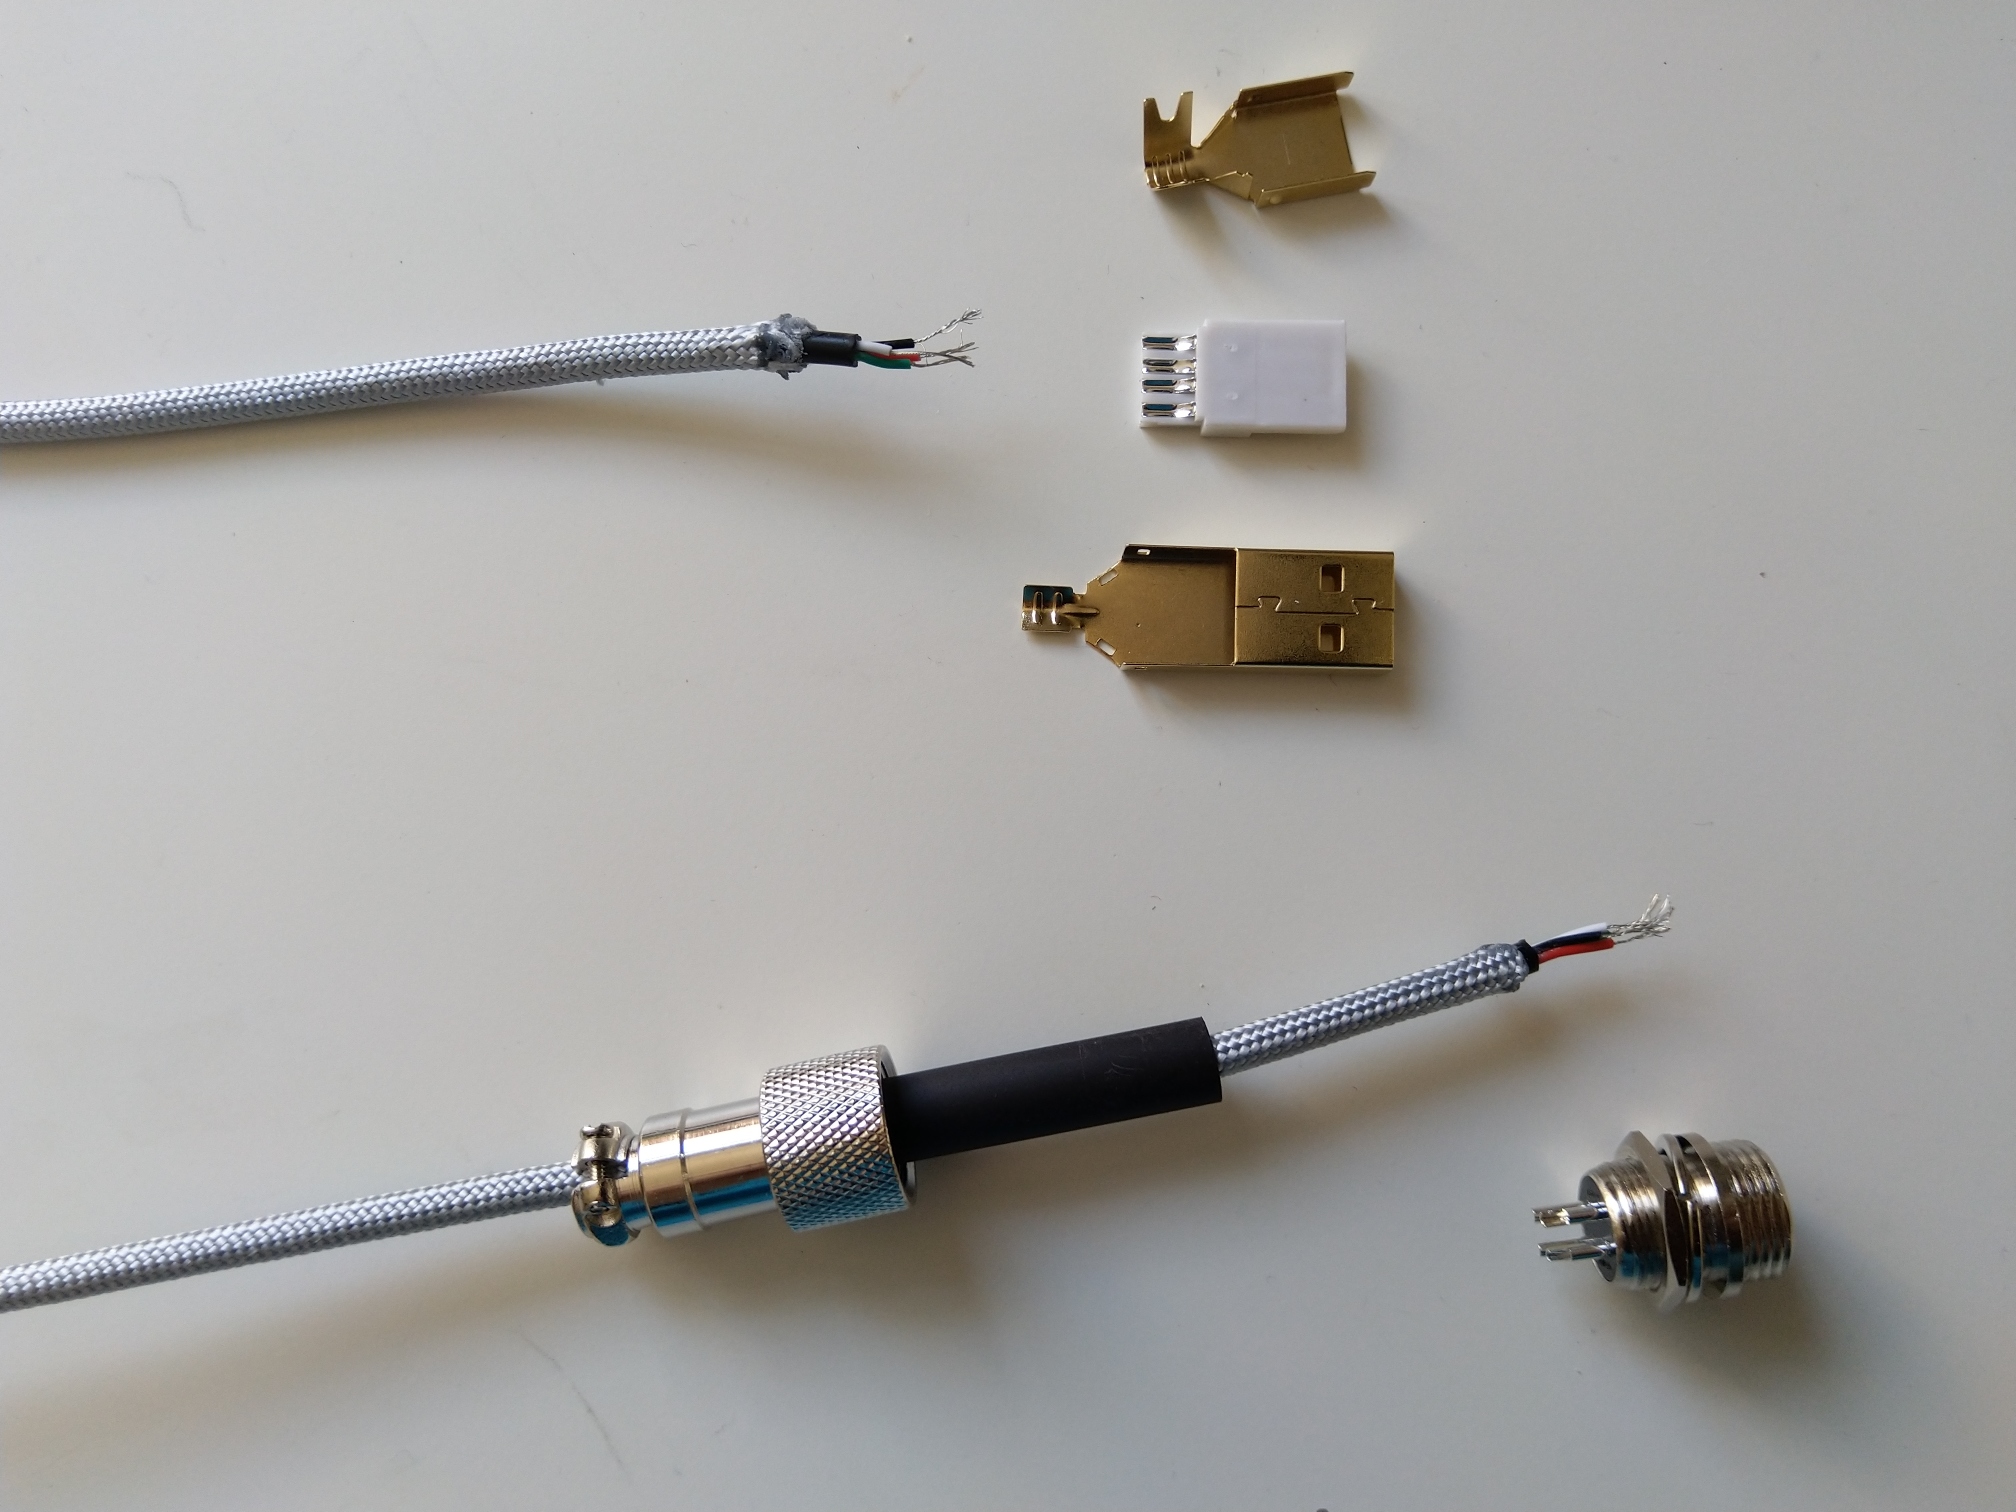 The longer piece of cable and its connectors. It's a bit harder to sleeve a longer piece of cable. Just take your time.